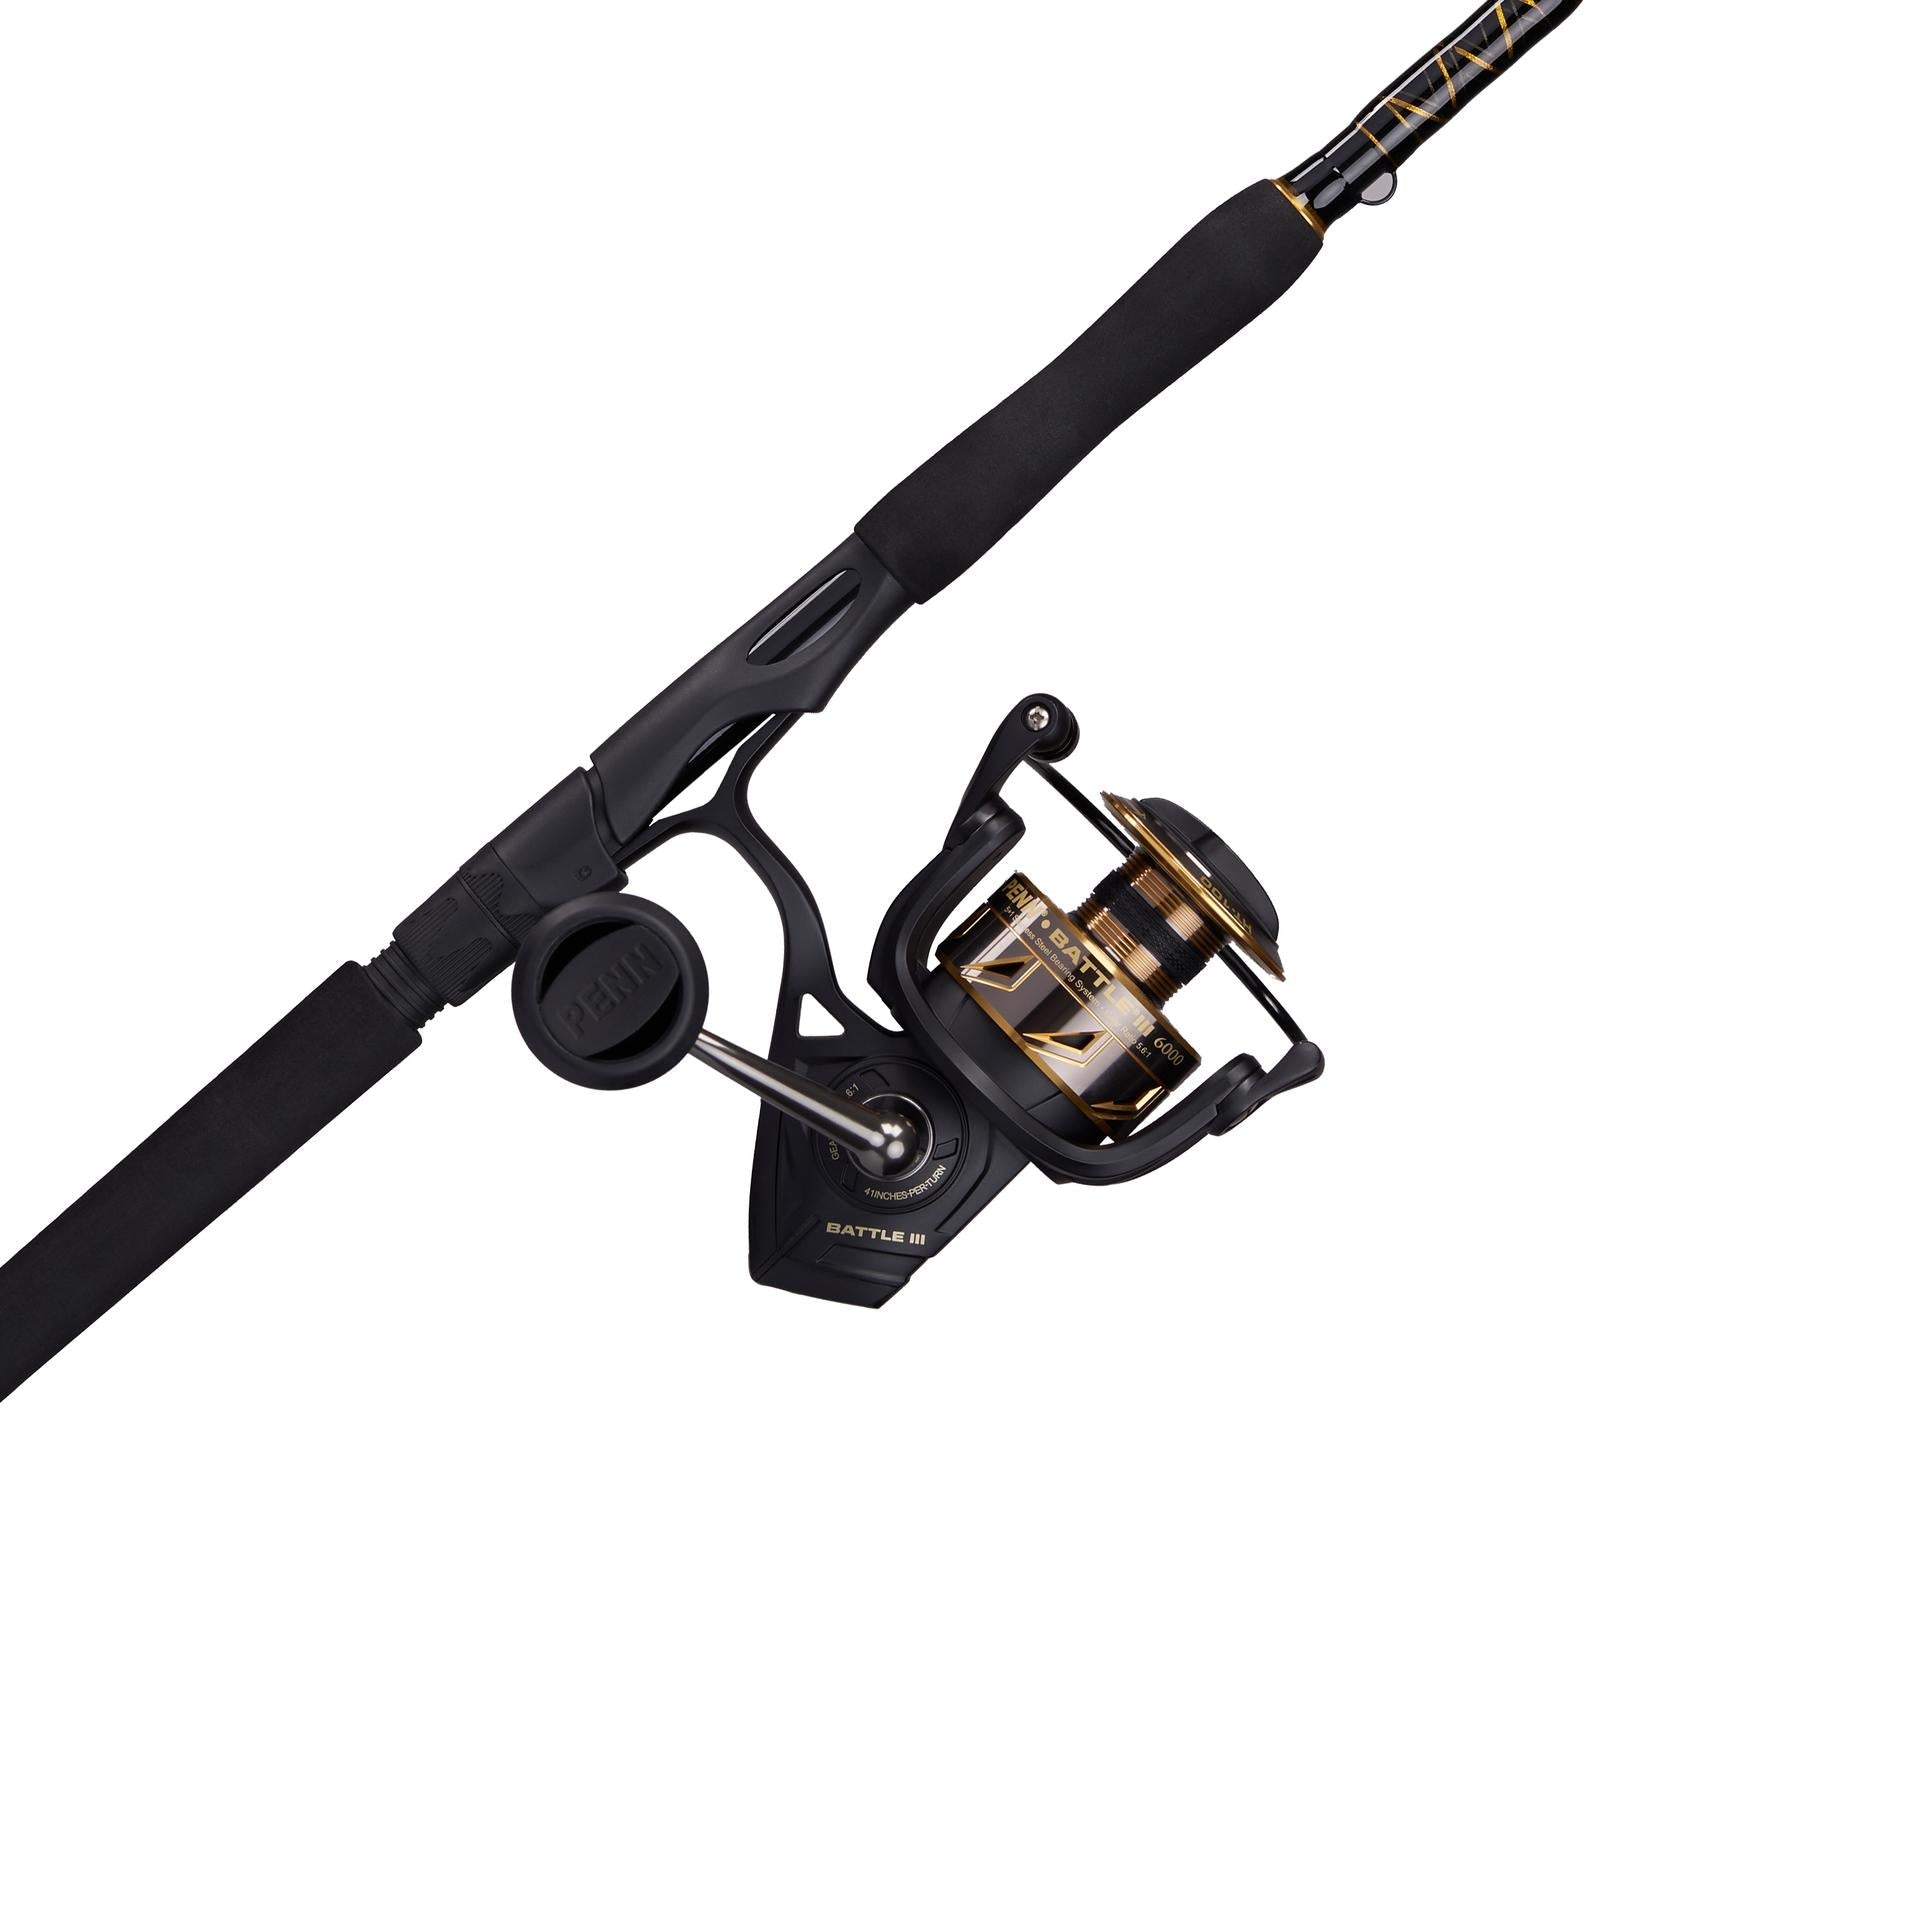  PENN 6'6” Wrath Fishing Rod and Reel Spinning Combo, 6'6”, 2  Graphite Composite Fishing Rod with 3 Reel, Durable and Lightweight, Black,  Blue, 2500 - 6'6 - Medium Light - 2pcs : Sports & Outdoors